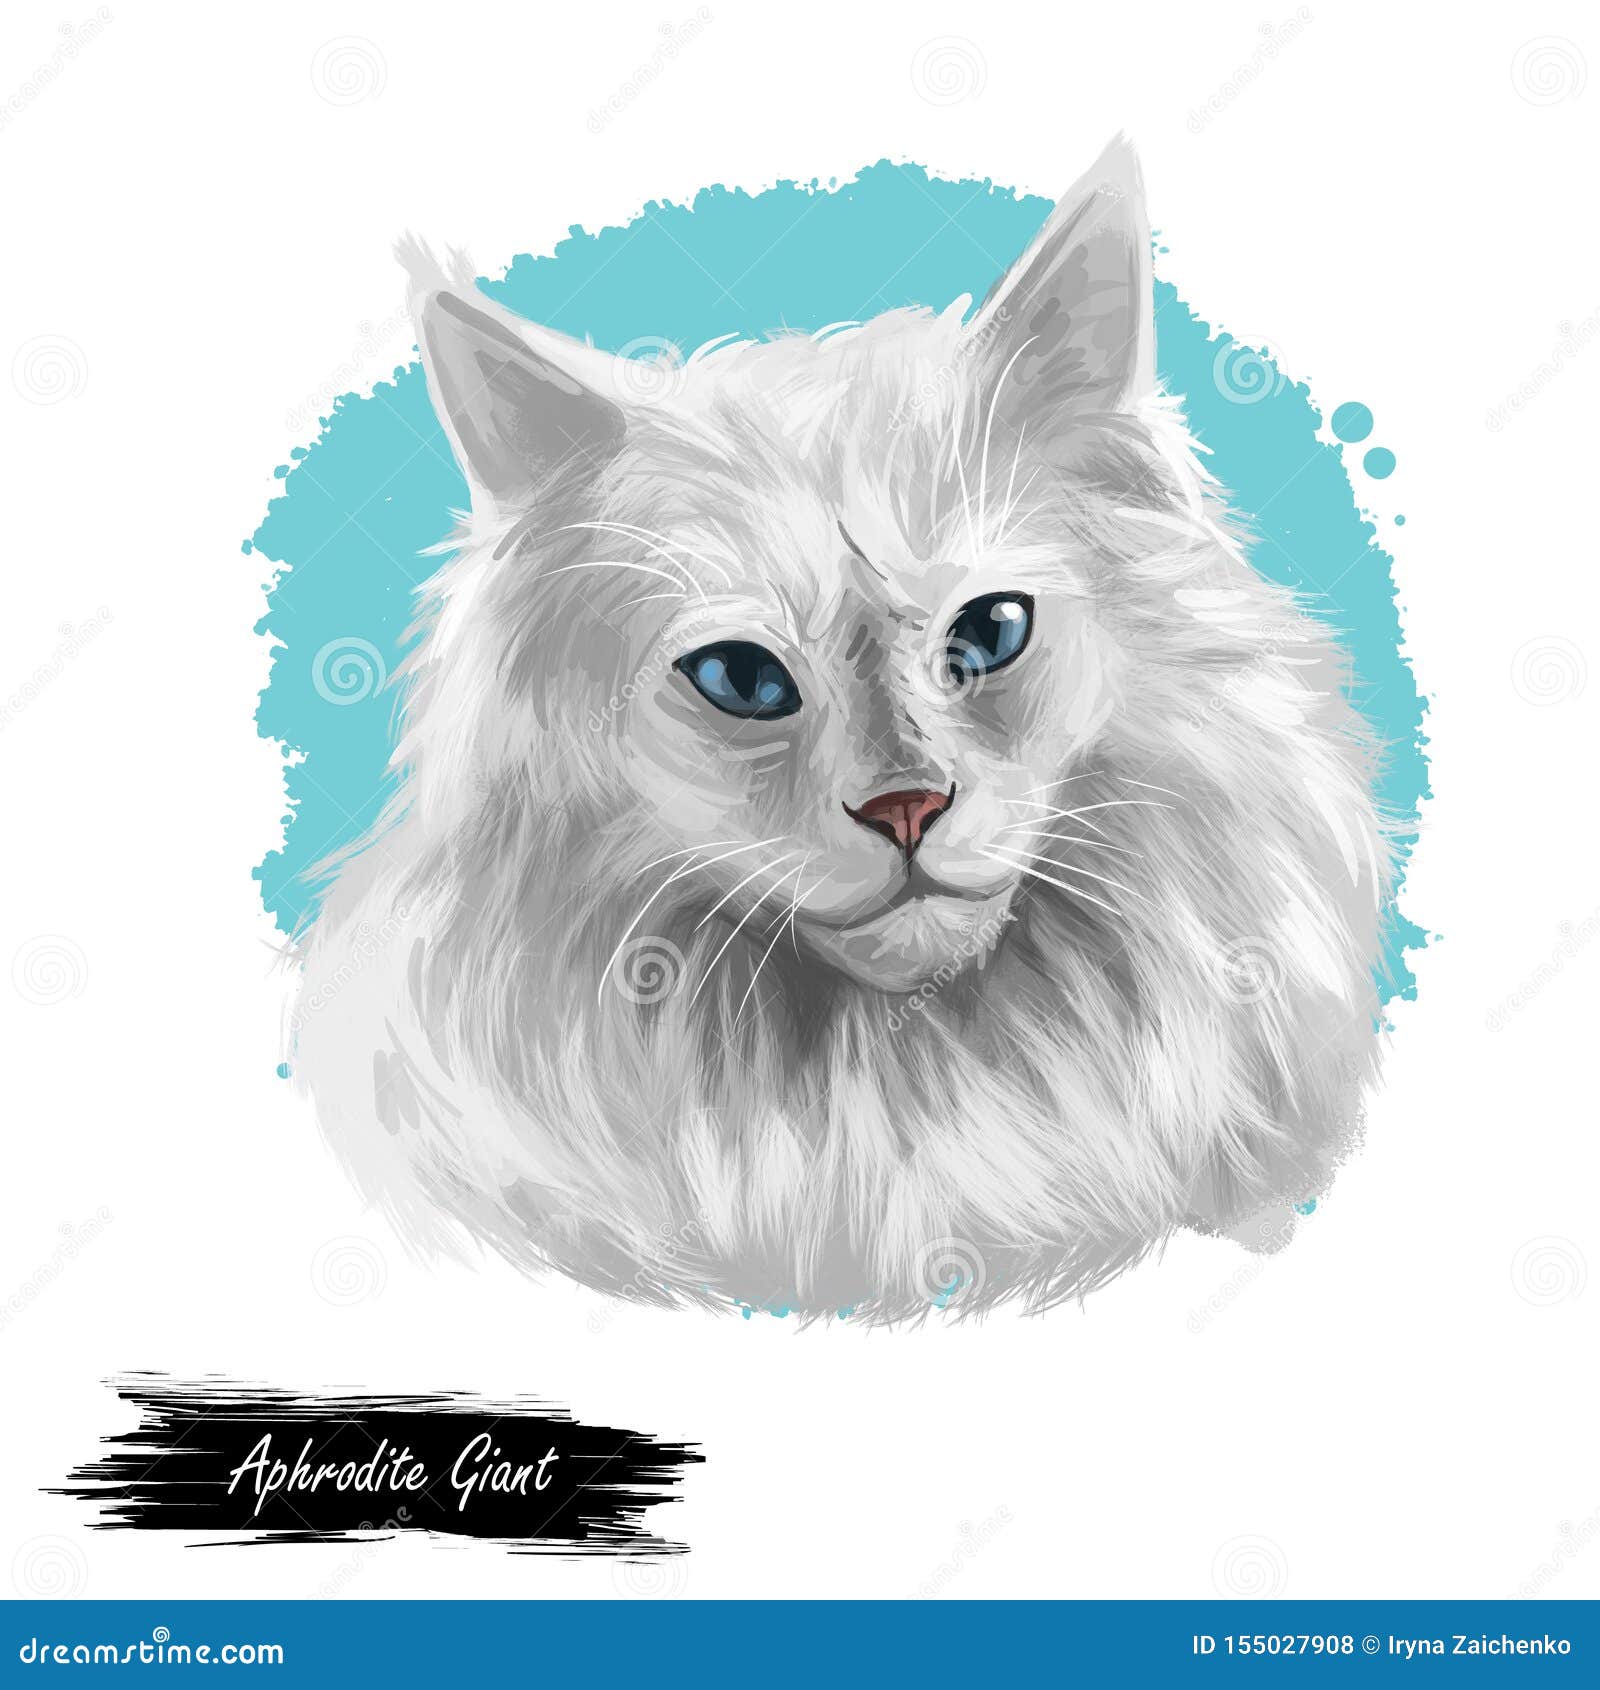 Domestic Breed Aphrodite Giant Cat Isolated On White Background Digital Art Illustration Of Hand Drawn Kitty For Web Kitten Long Stock Illustration Illustration Of Drawn Kitten 155027908